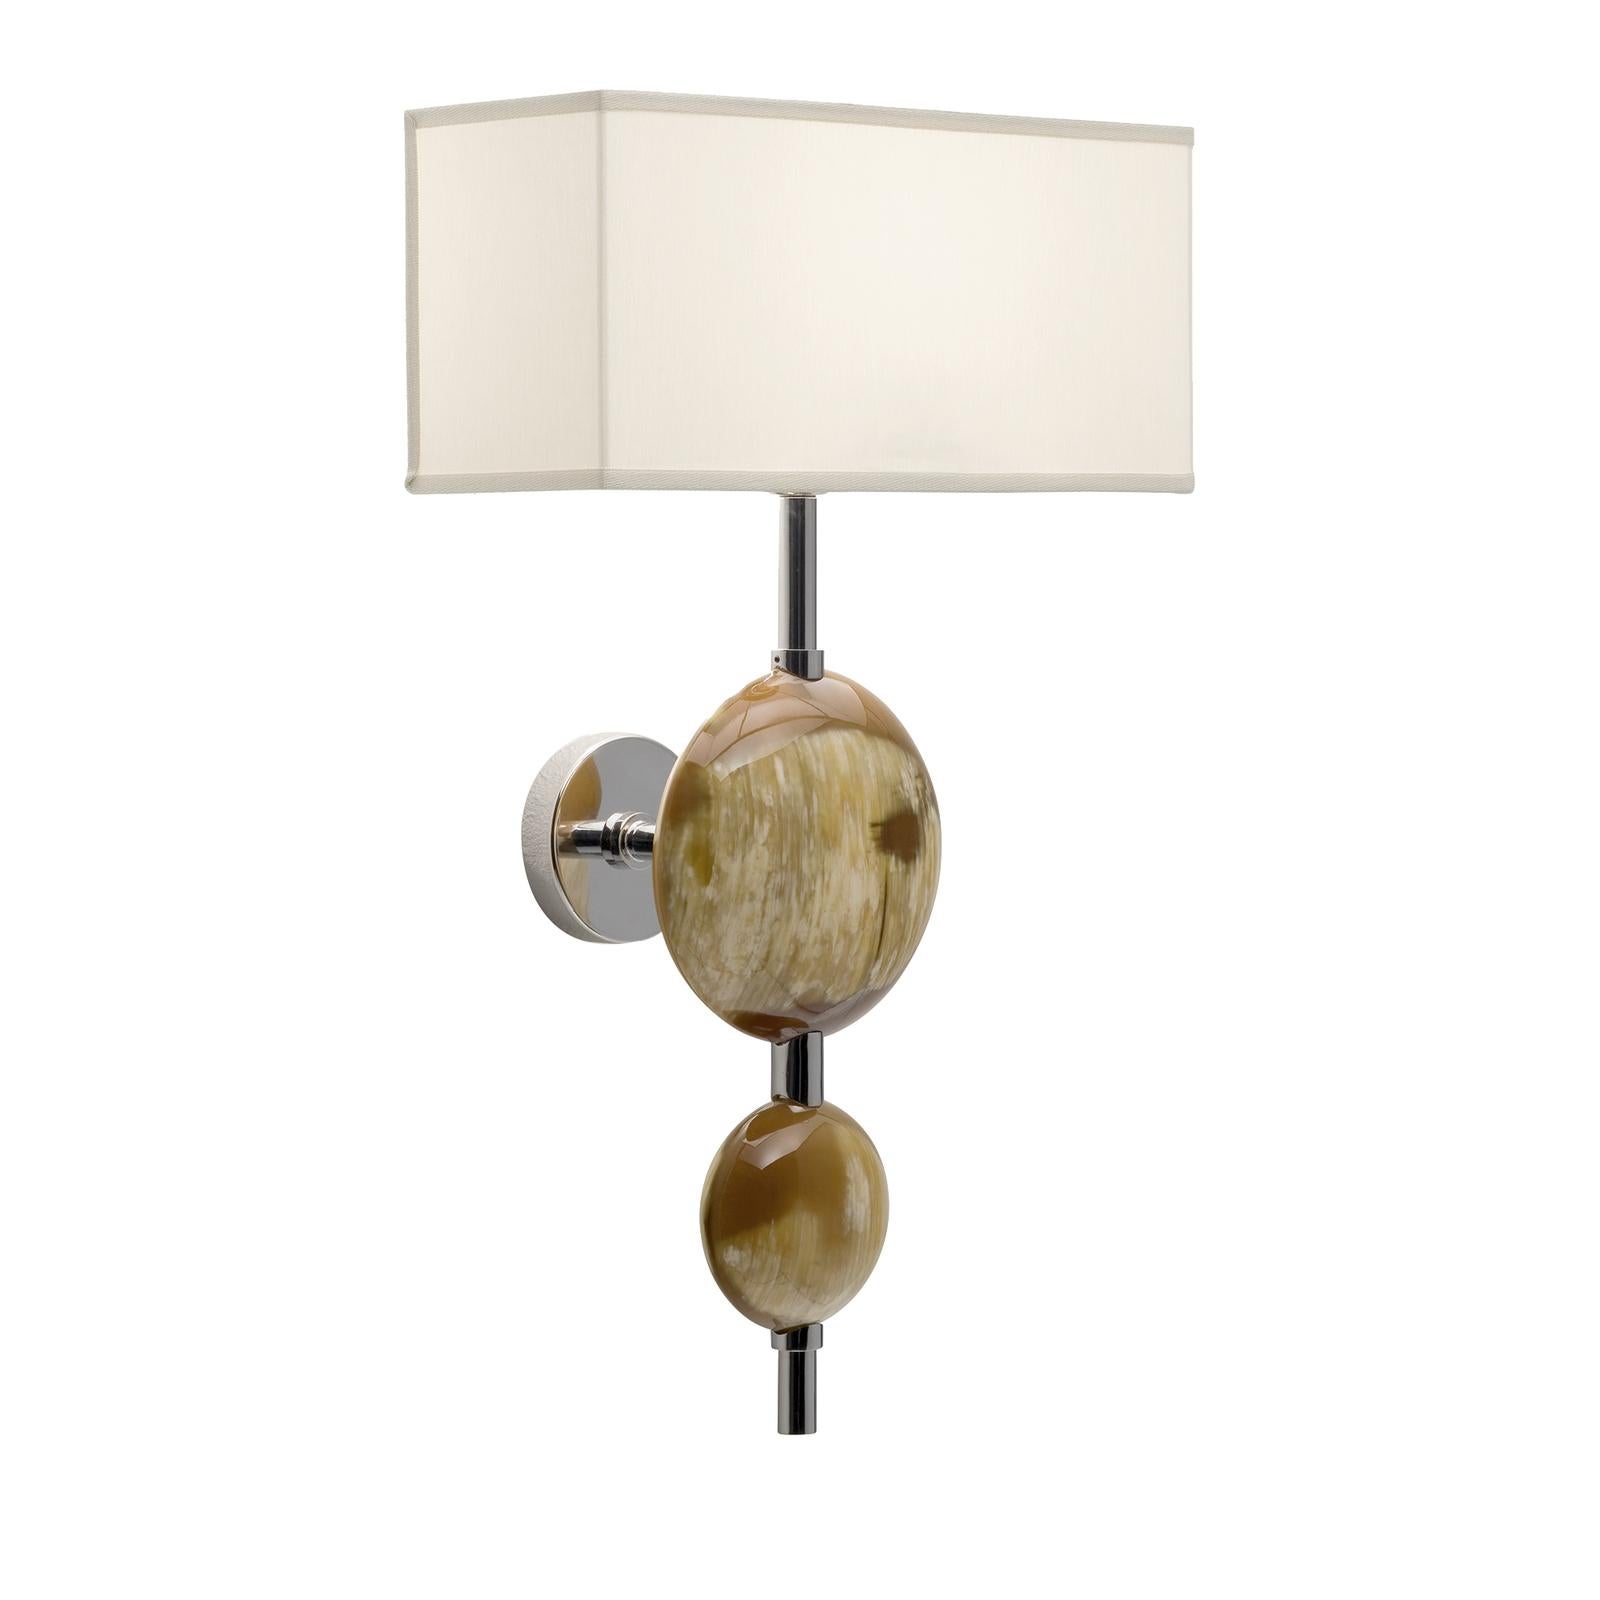 A chic and classic design characterizes this elegant sconce, crafted of stainless steel with a polished finish that will add timeless elegance to any interior. Topped with a rectangular lampshade in ivory shantung, two natural horn disks with soft,